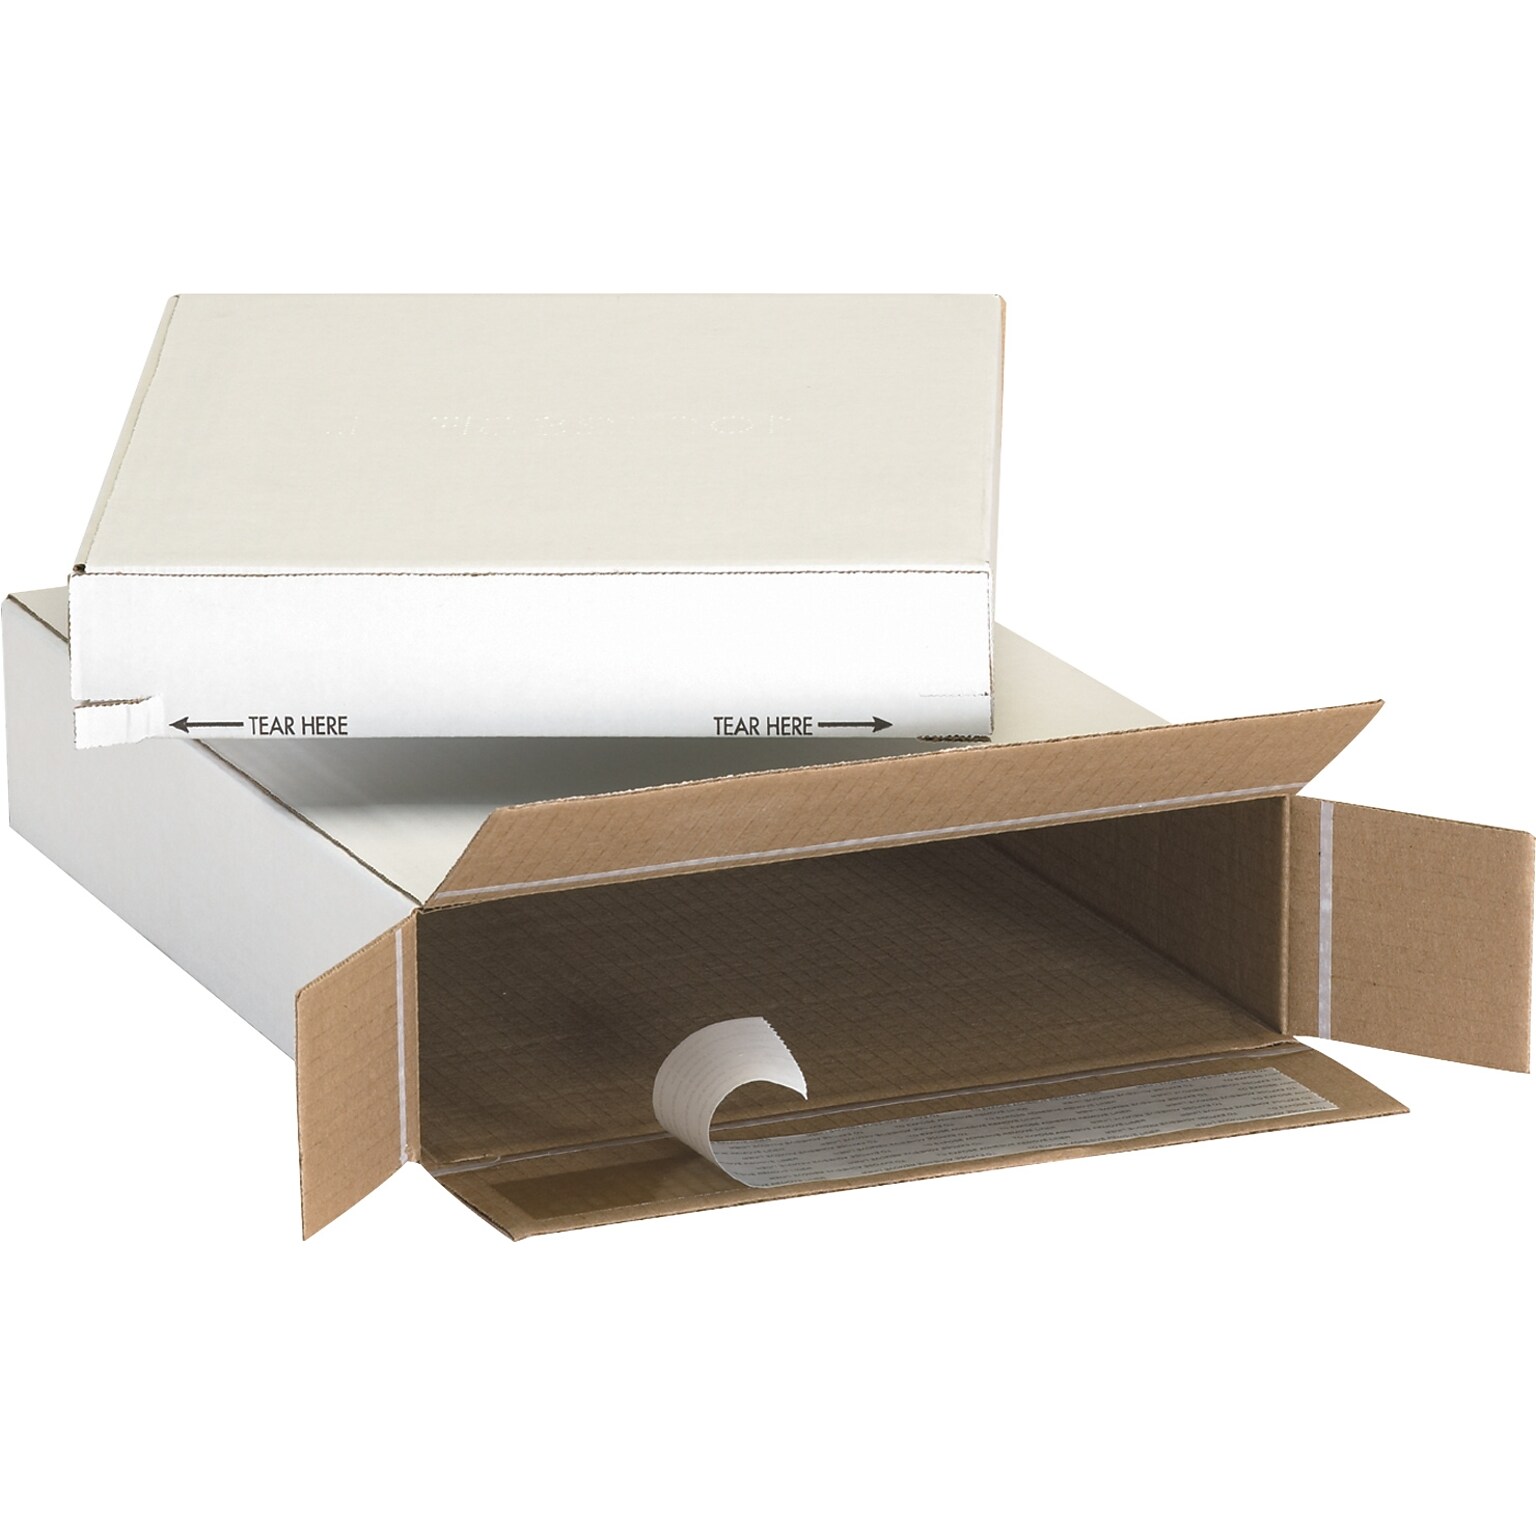 Quill Brand® 3 x 15.12 x 11.25 Self-Sealing Side Loading Boxes, 32 ECT, White, 25/Bundle (11315SSFOL)